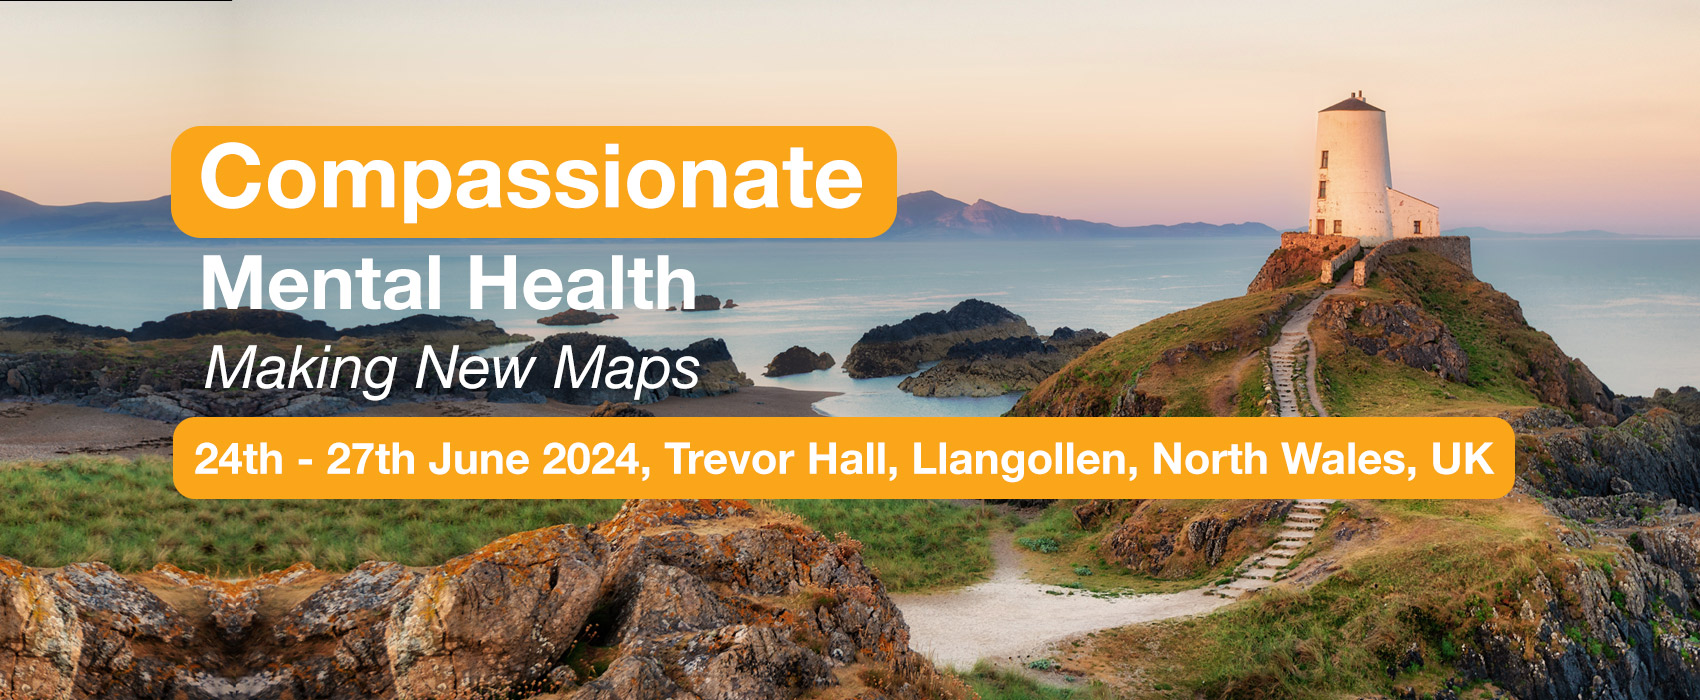 Banner with a beautiful north wales scene of rolling hills leading to the beach and a winding path and steps up towards a light house...beautiful sunset summer skies in the background. Words read Compassionate Mental Health Making New Maps 24-27 June 2024 Trevor Hall, Llangollen, North Wales